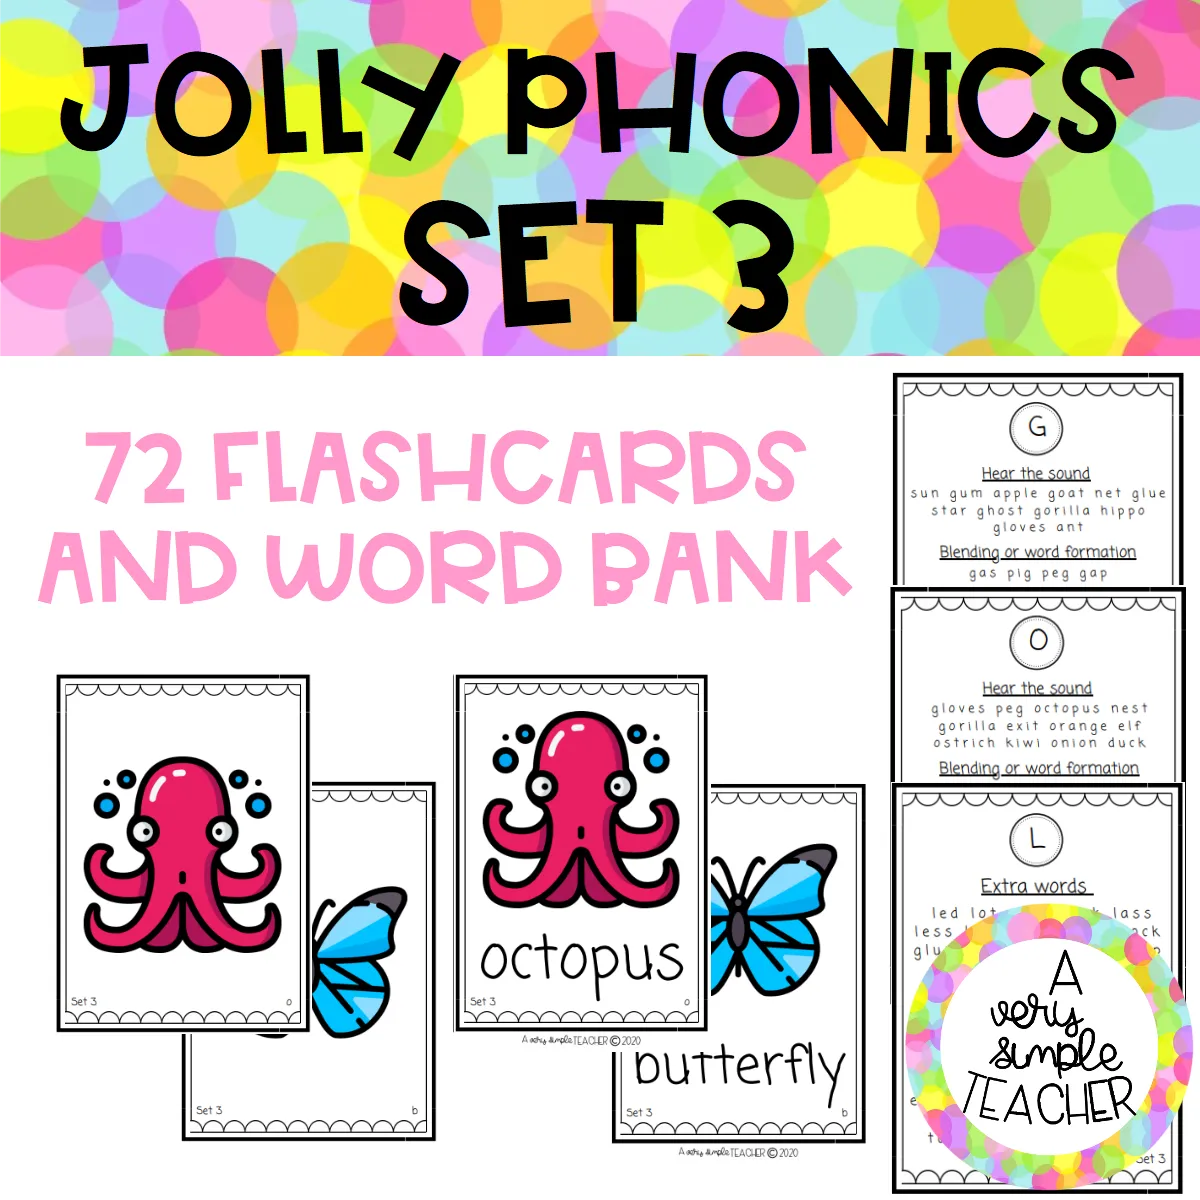 JOLLY PHONICS SET 3: Flashcards and word bank